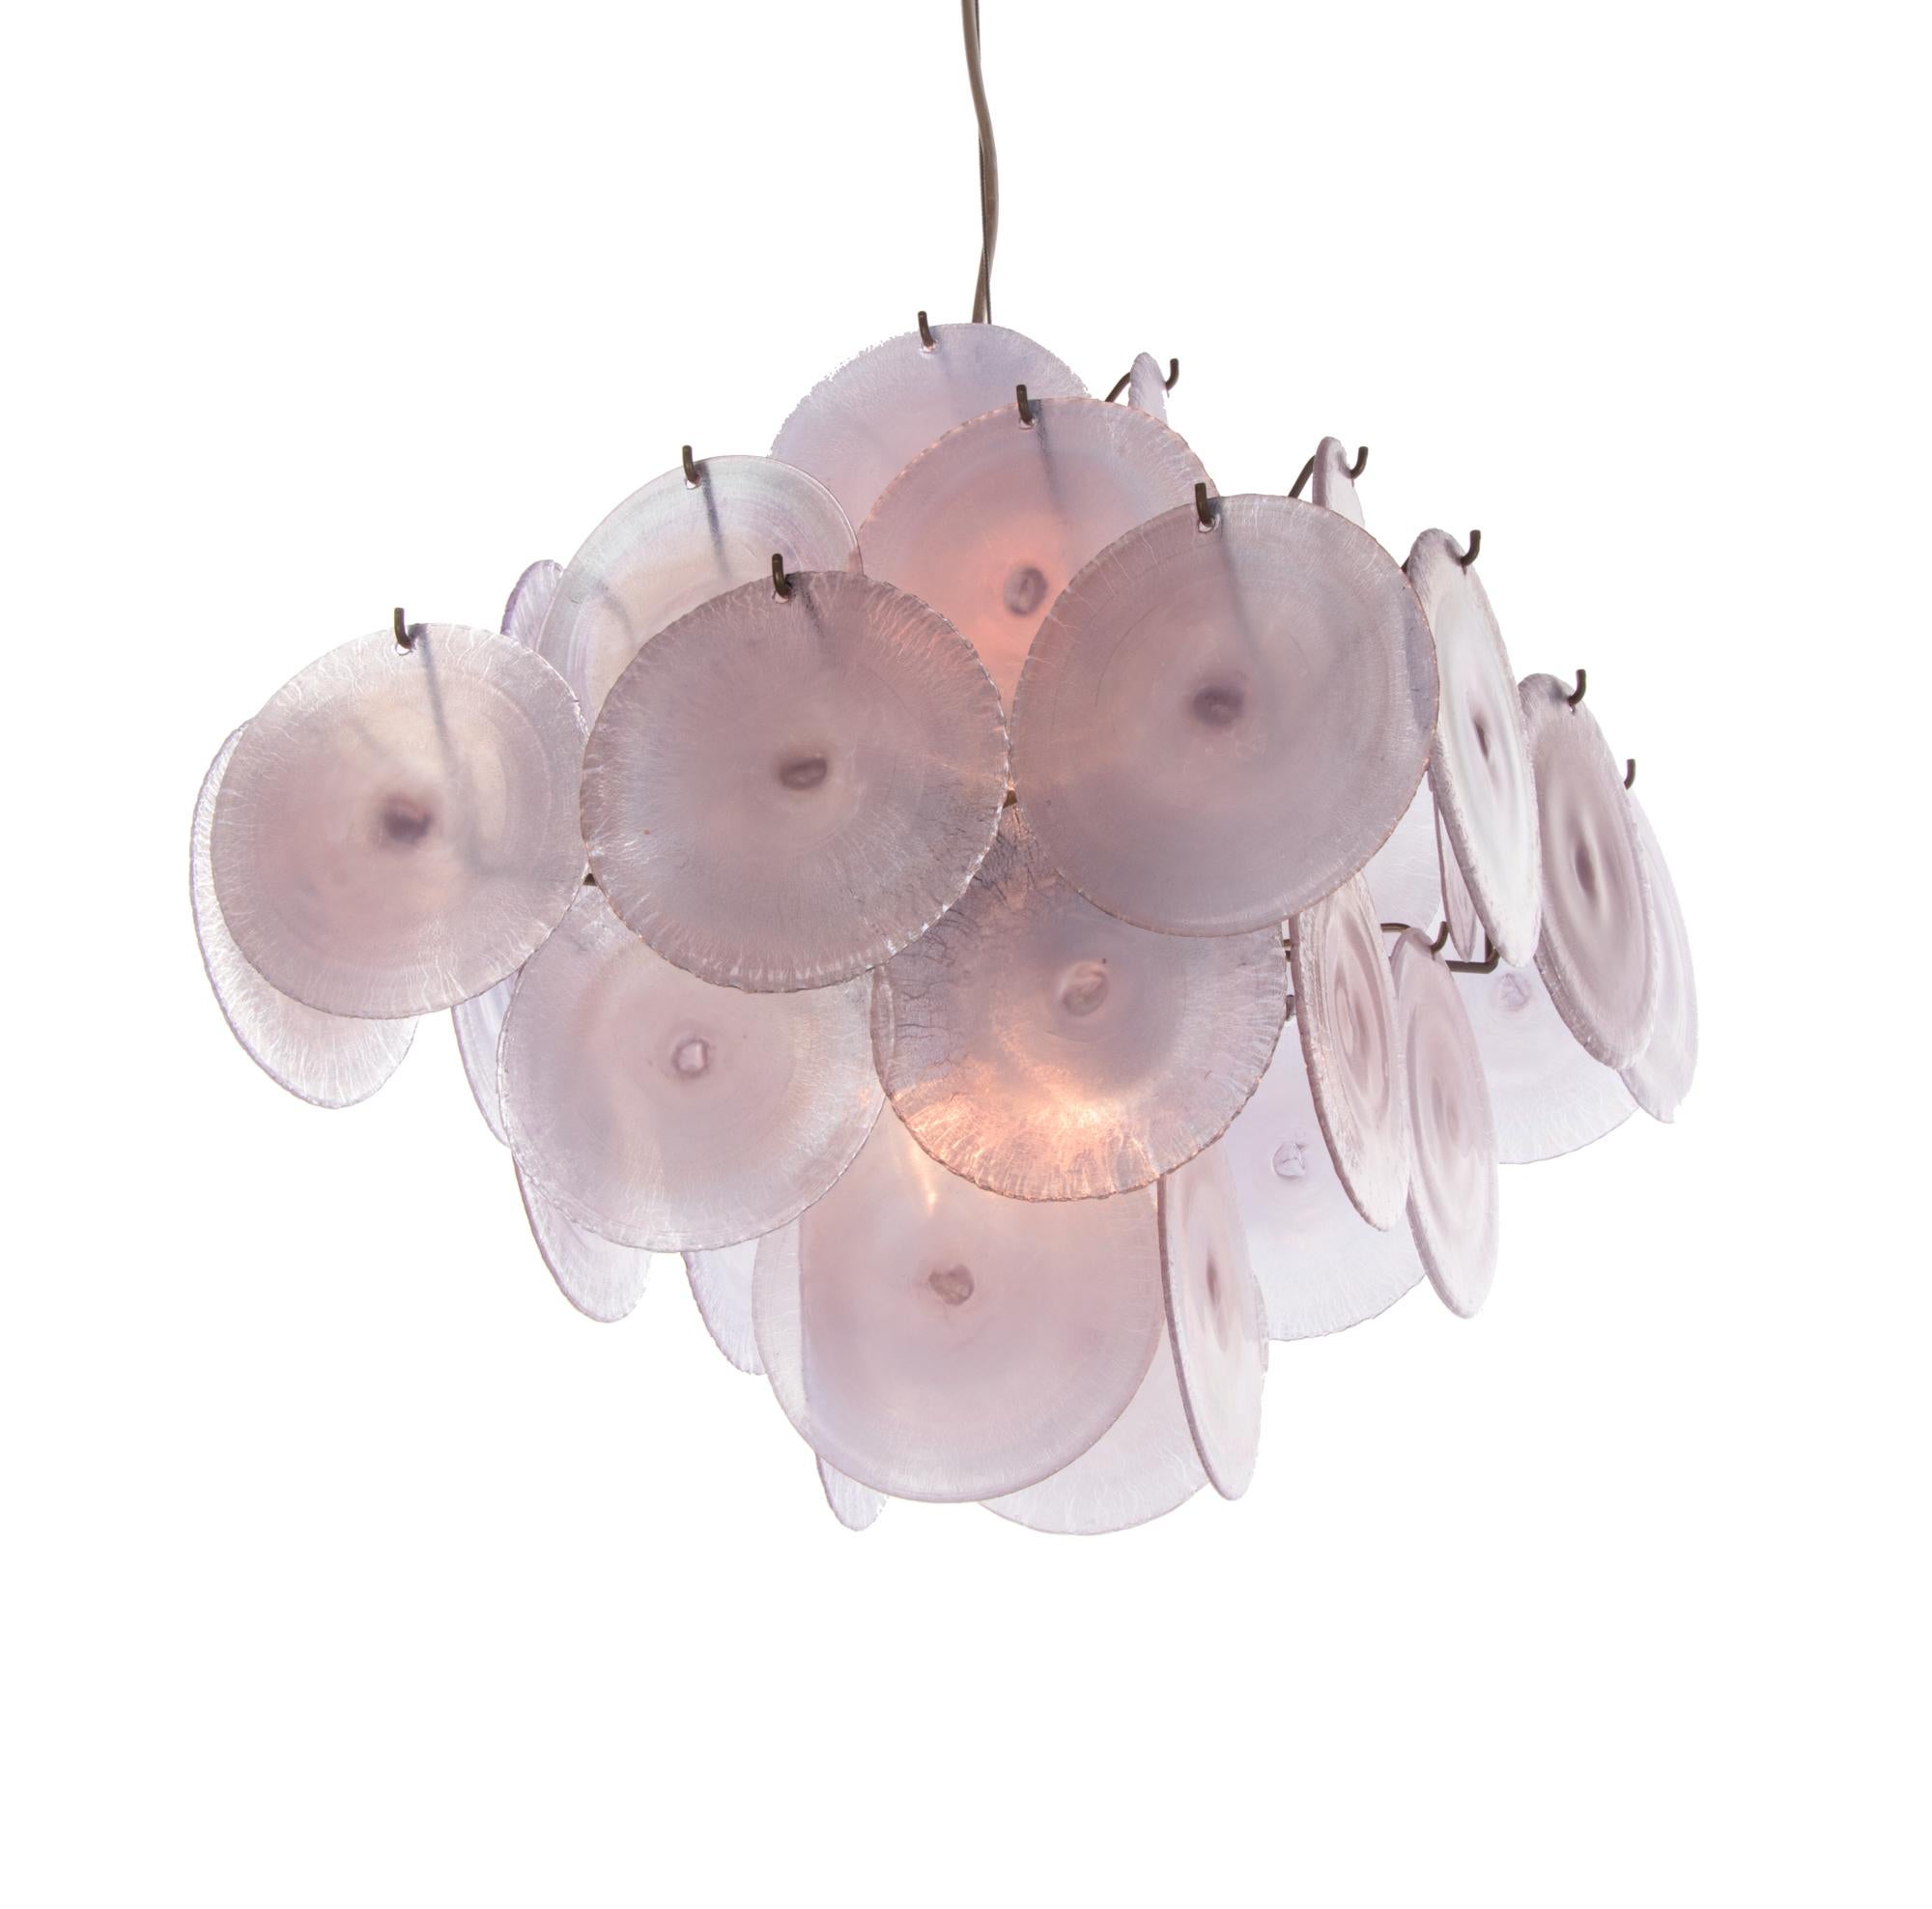 Elegant chandelier with iridescent, pearl-like discs with crinkled edges arranged on five levels on a chromed sputnik frame. The color of the glasses changes when lit from a pale blue to amethyst. Chandelier illuminates beautifully and offers a lot